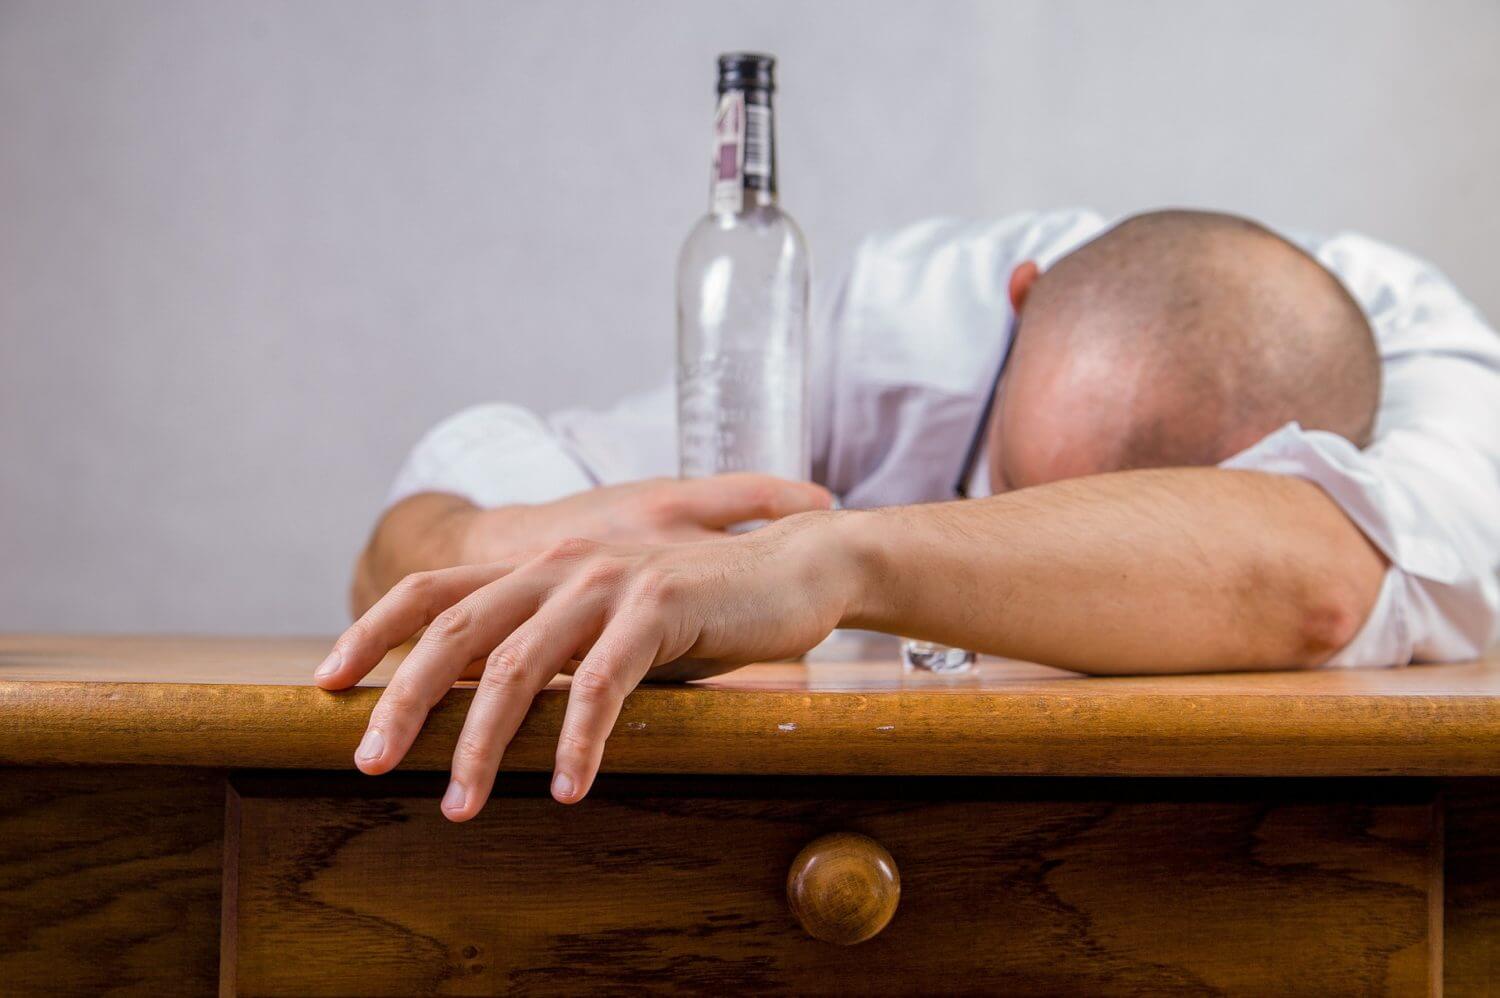 OLDER ALCOHOLICS ARE MORE PRONE TO SUICIDE